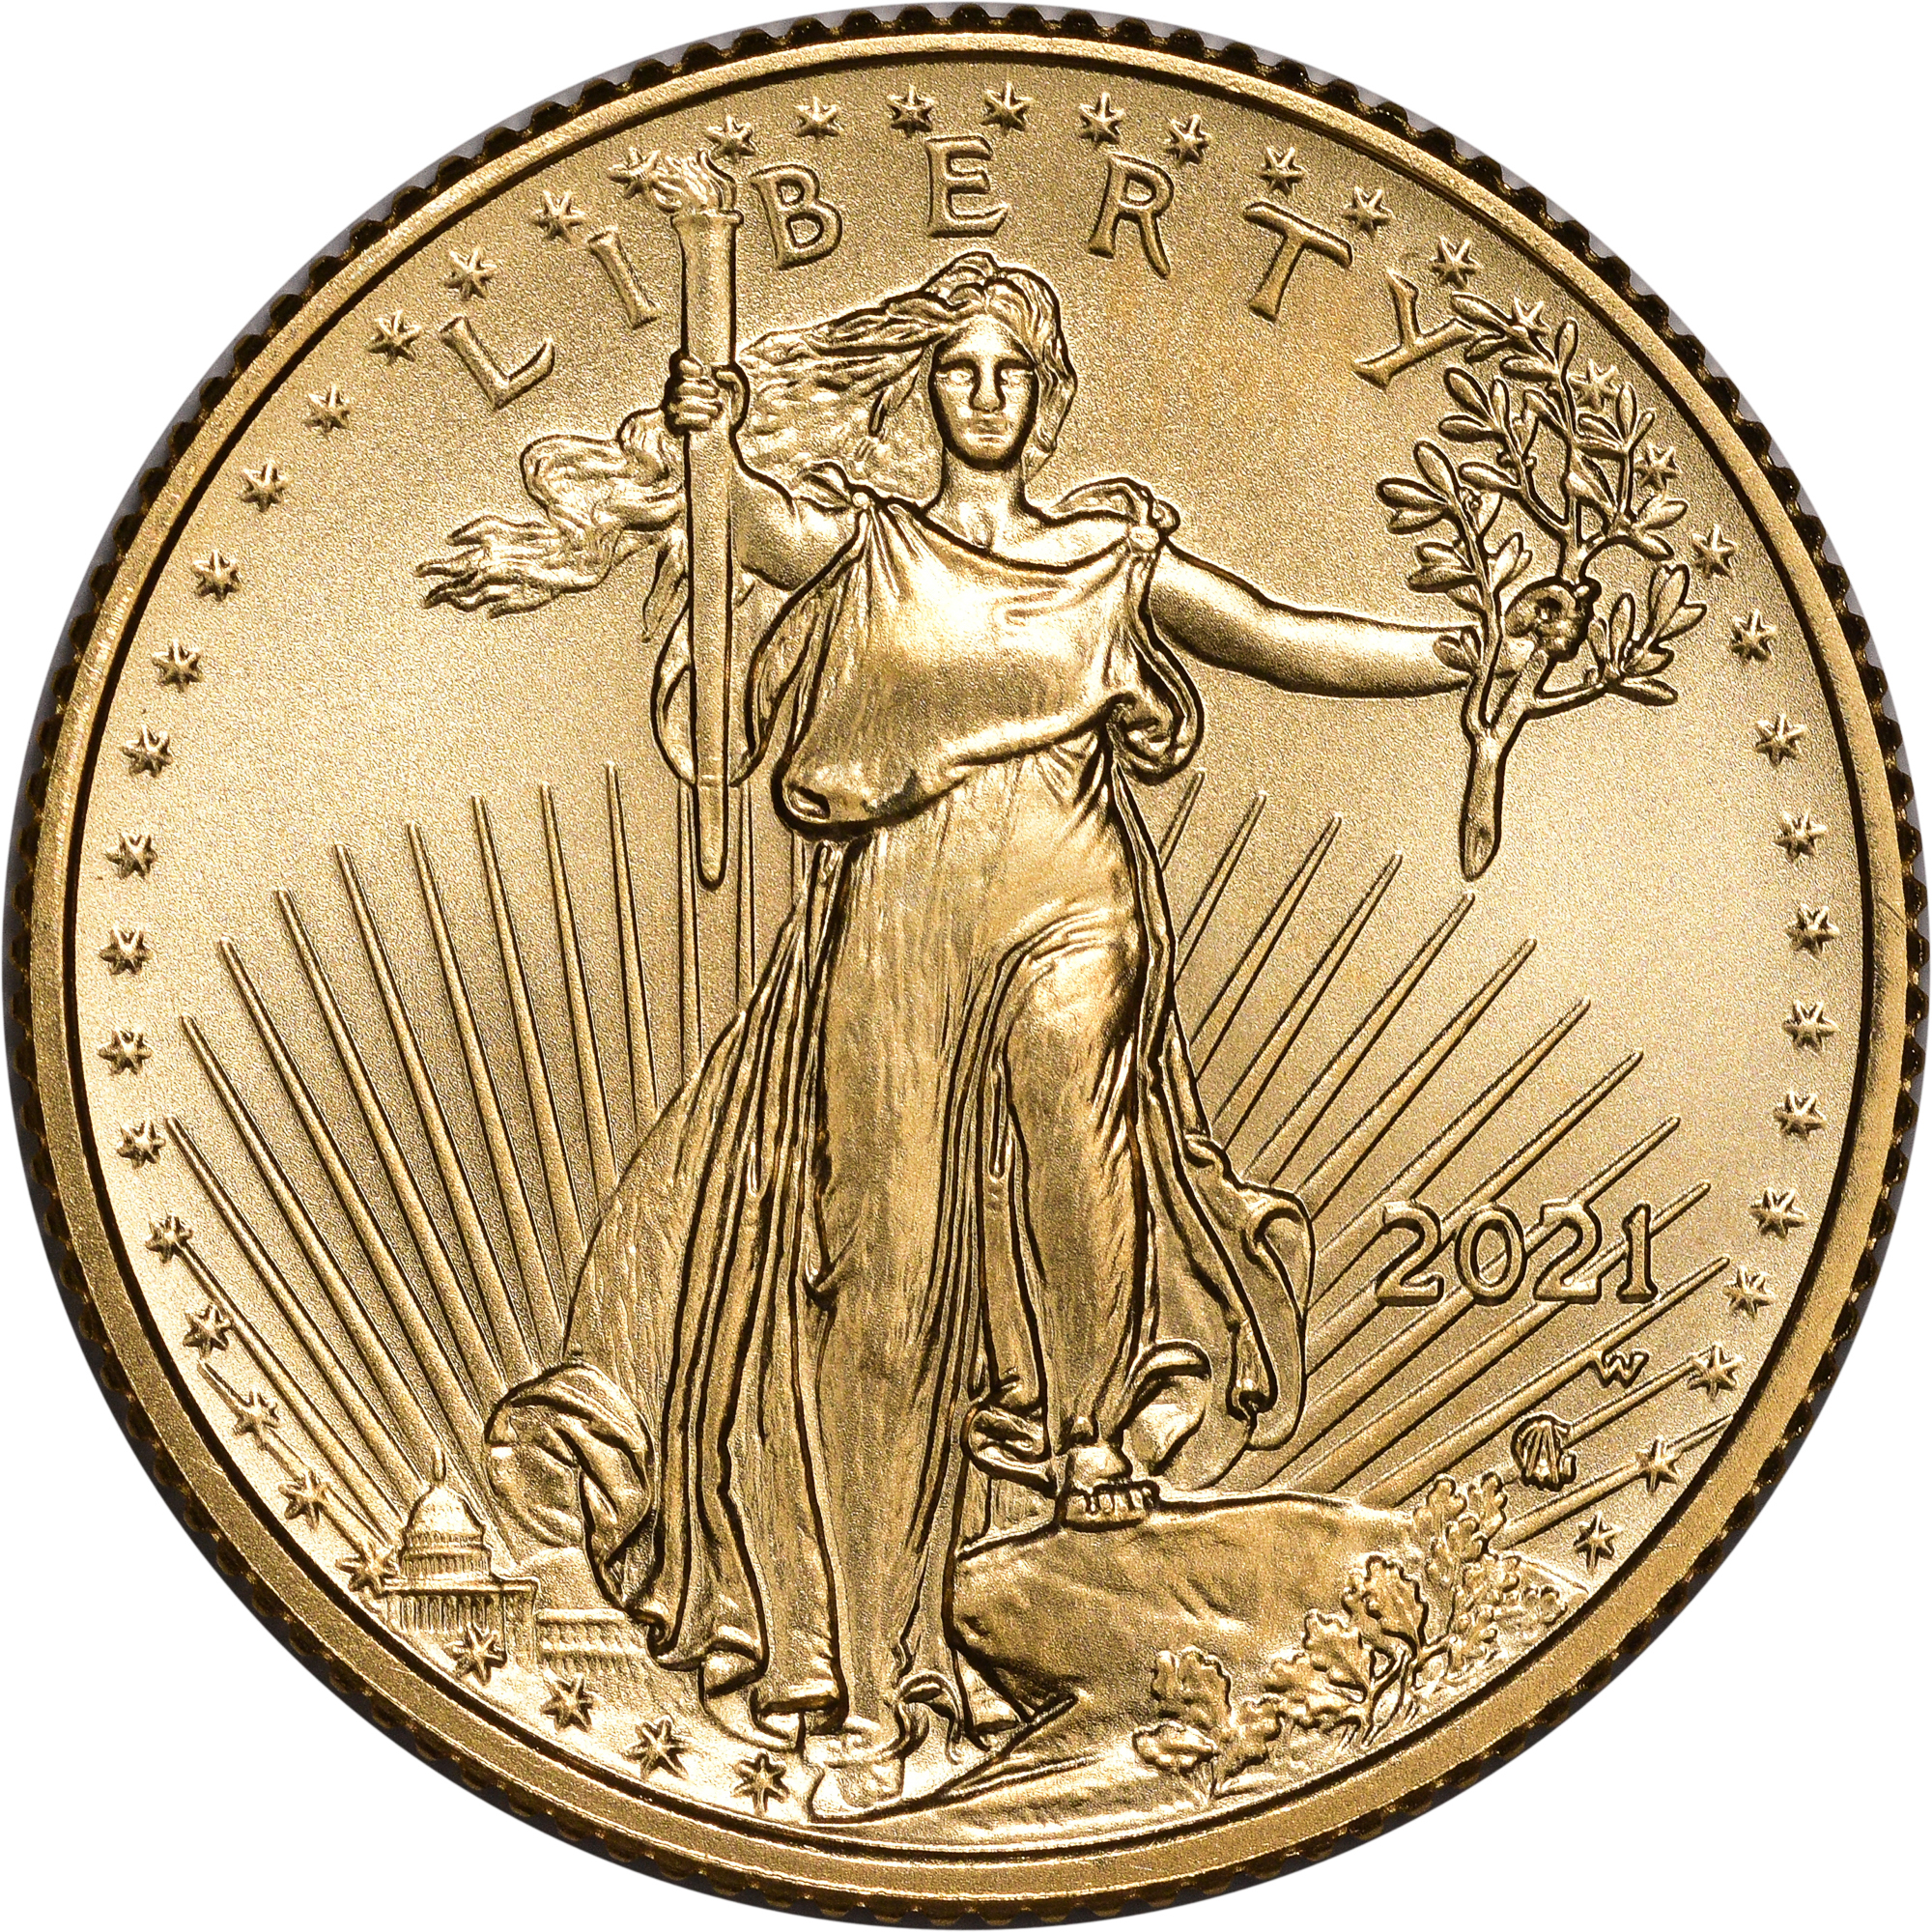 The Newly Discovered 2021-W $10 Quarter-Ounce Gold Eagle Struck from Proof Dies Error